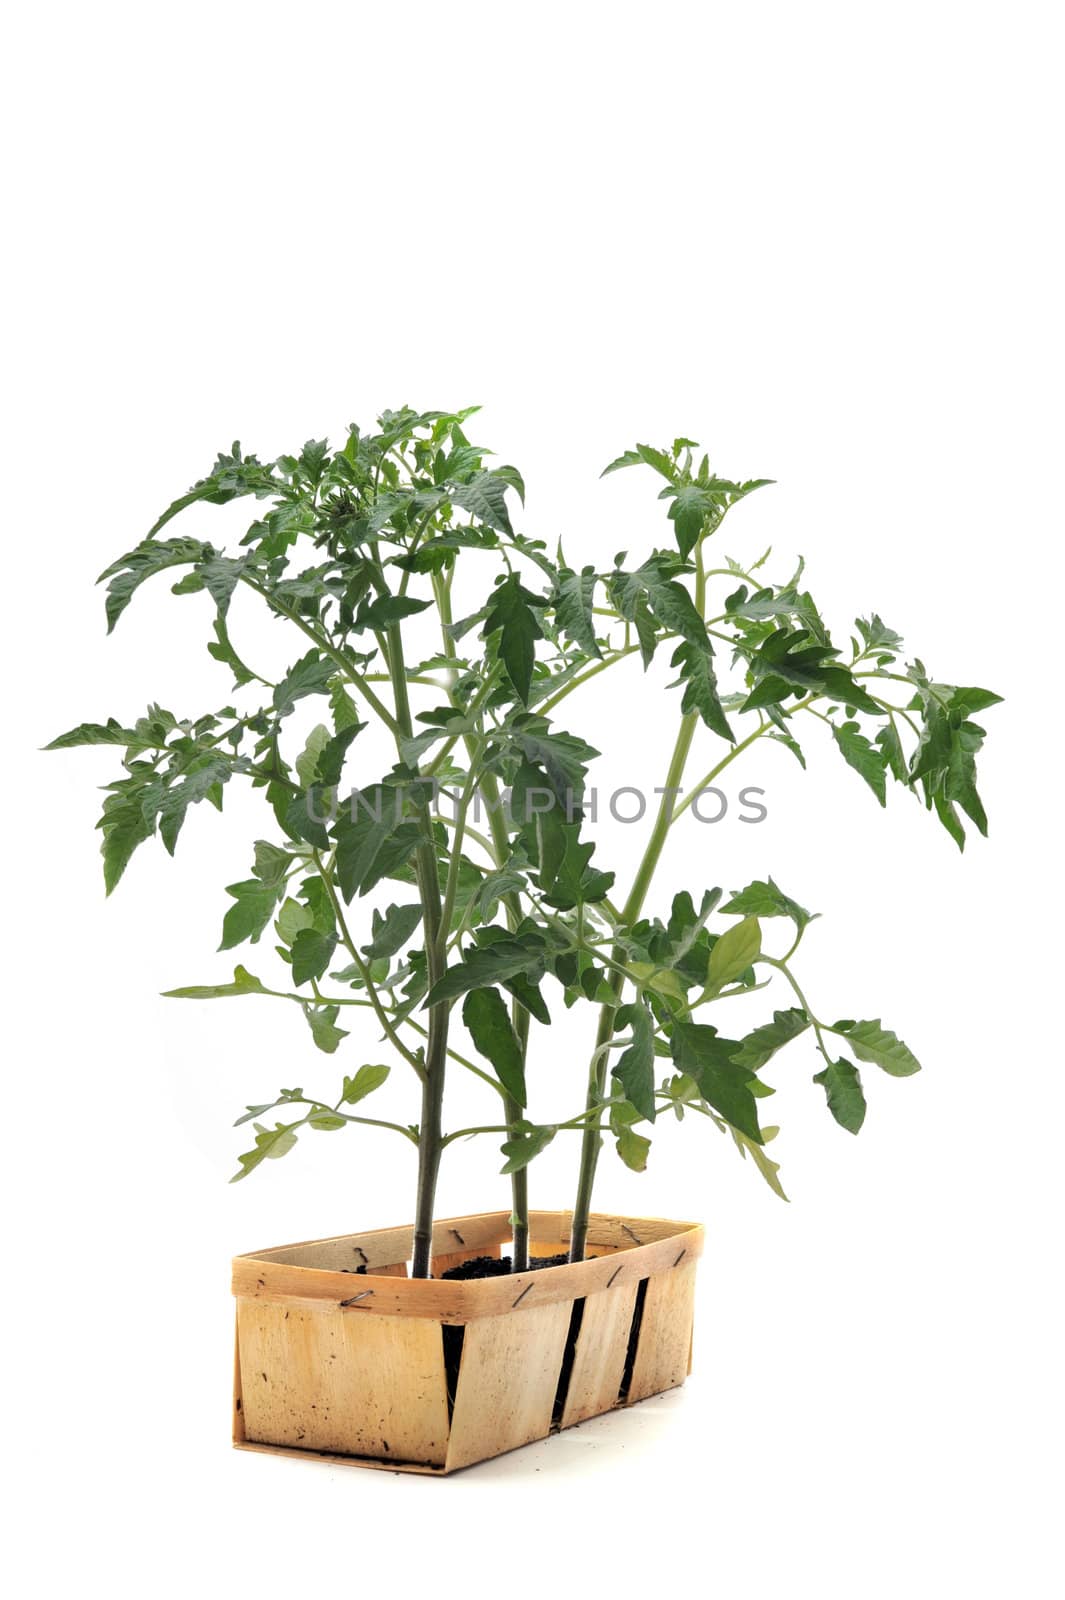 Tomato seedling in front of white background